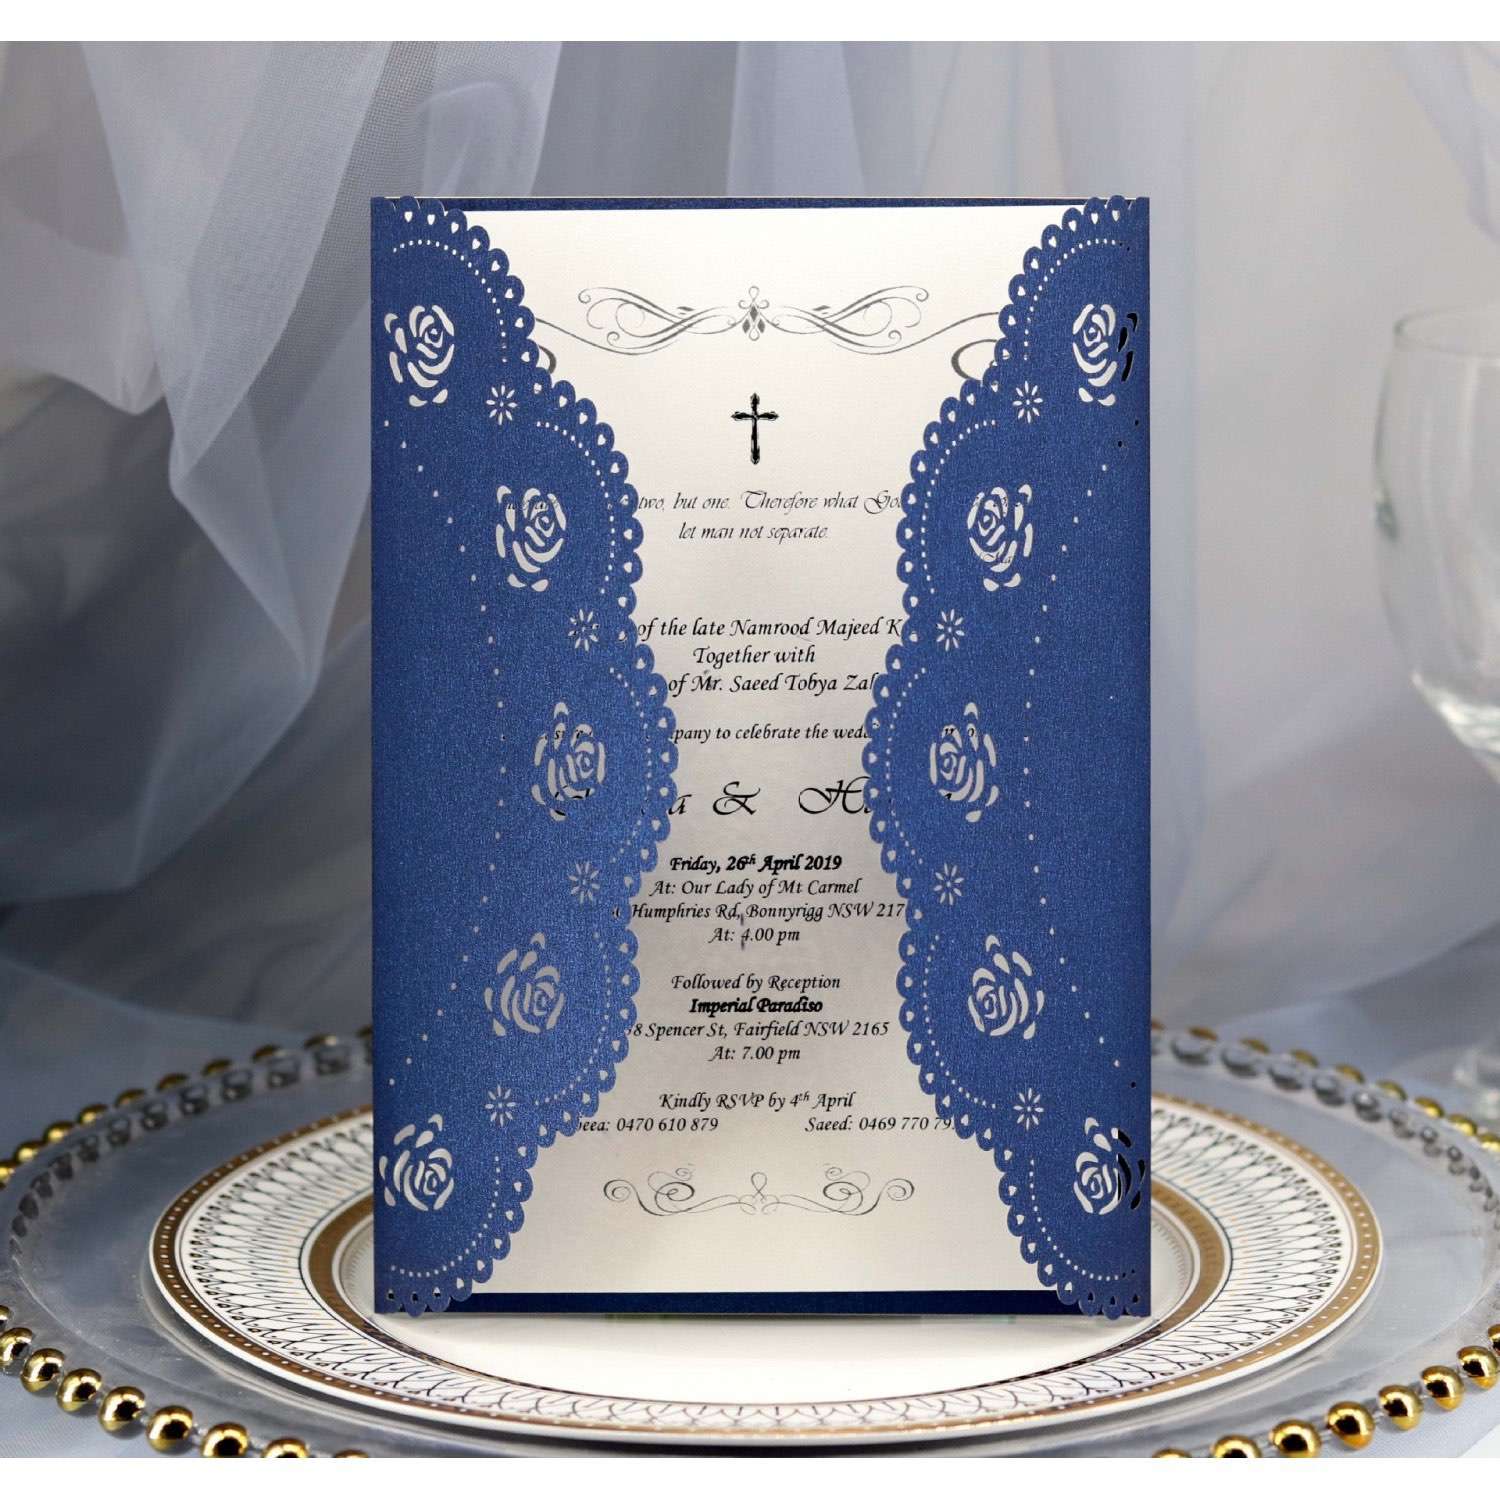 Business Invitation Card Wedding Supplies Holiday Greeting Card Wholesale